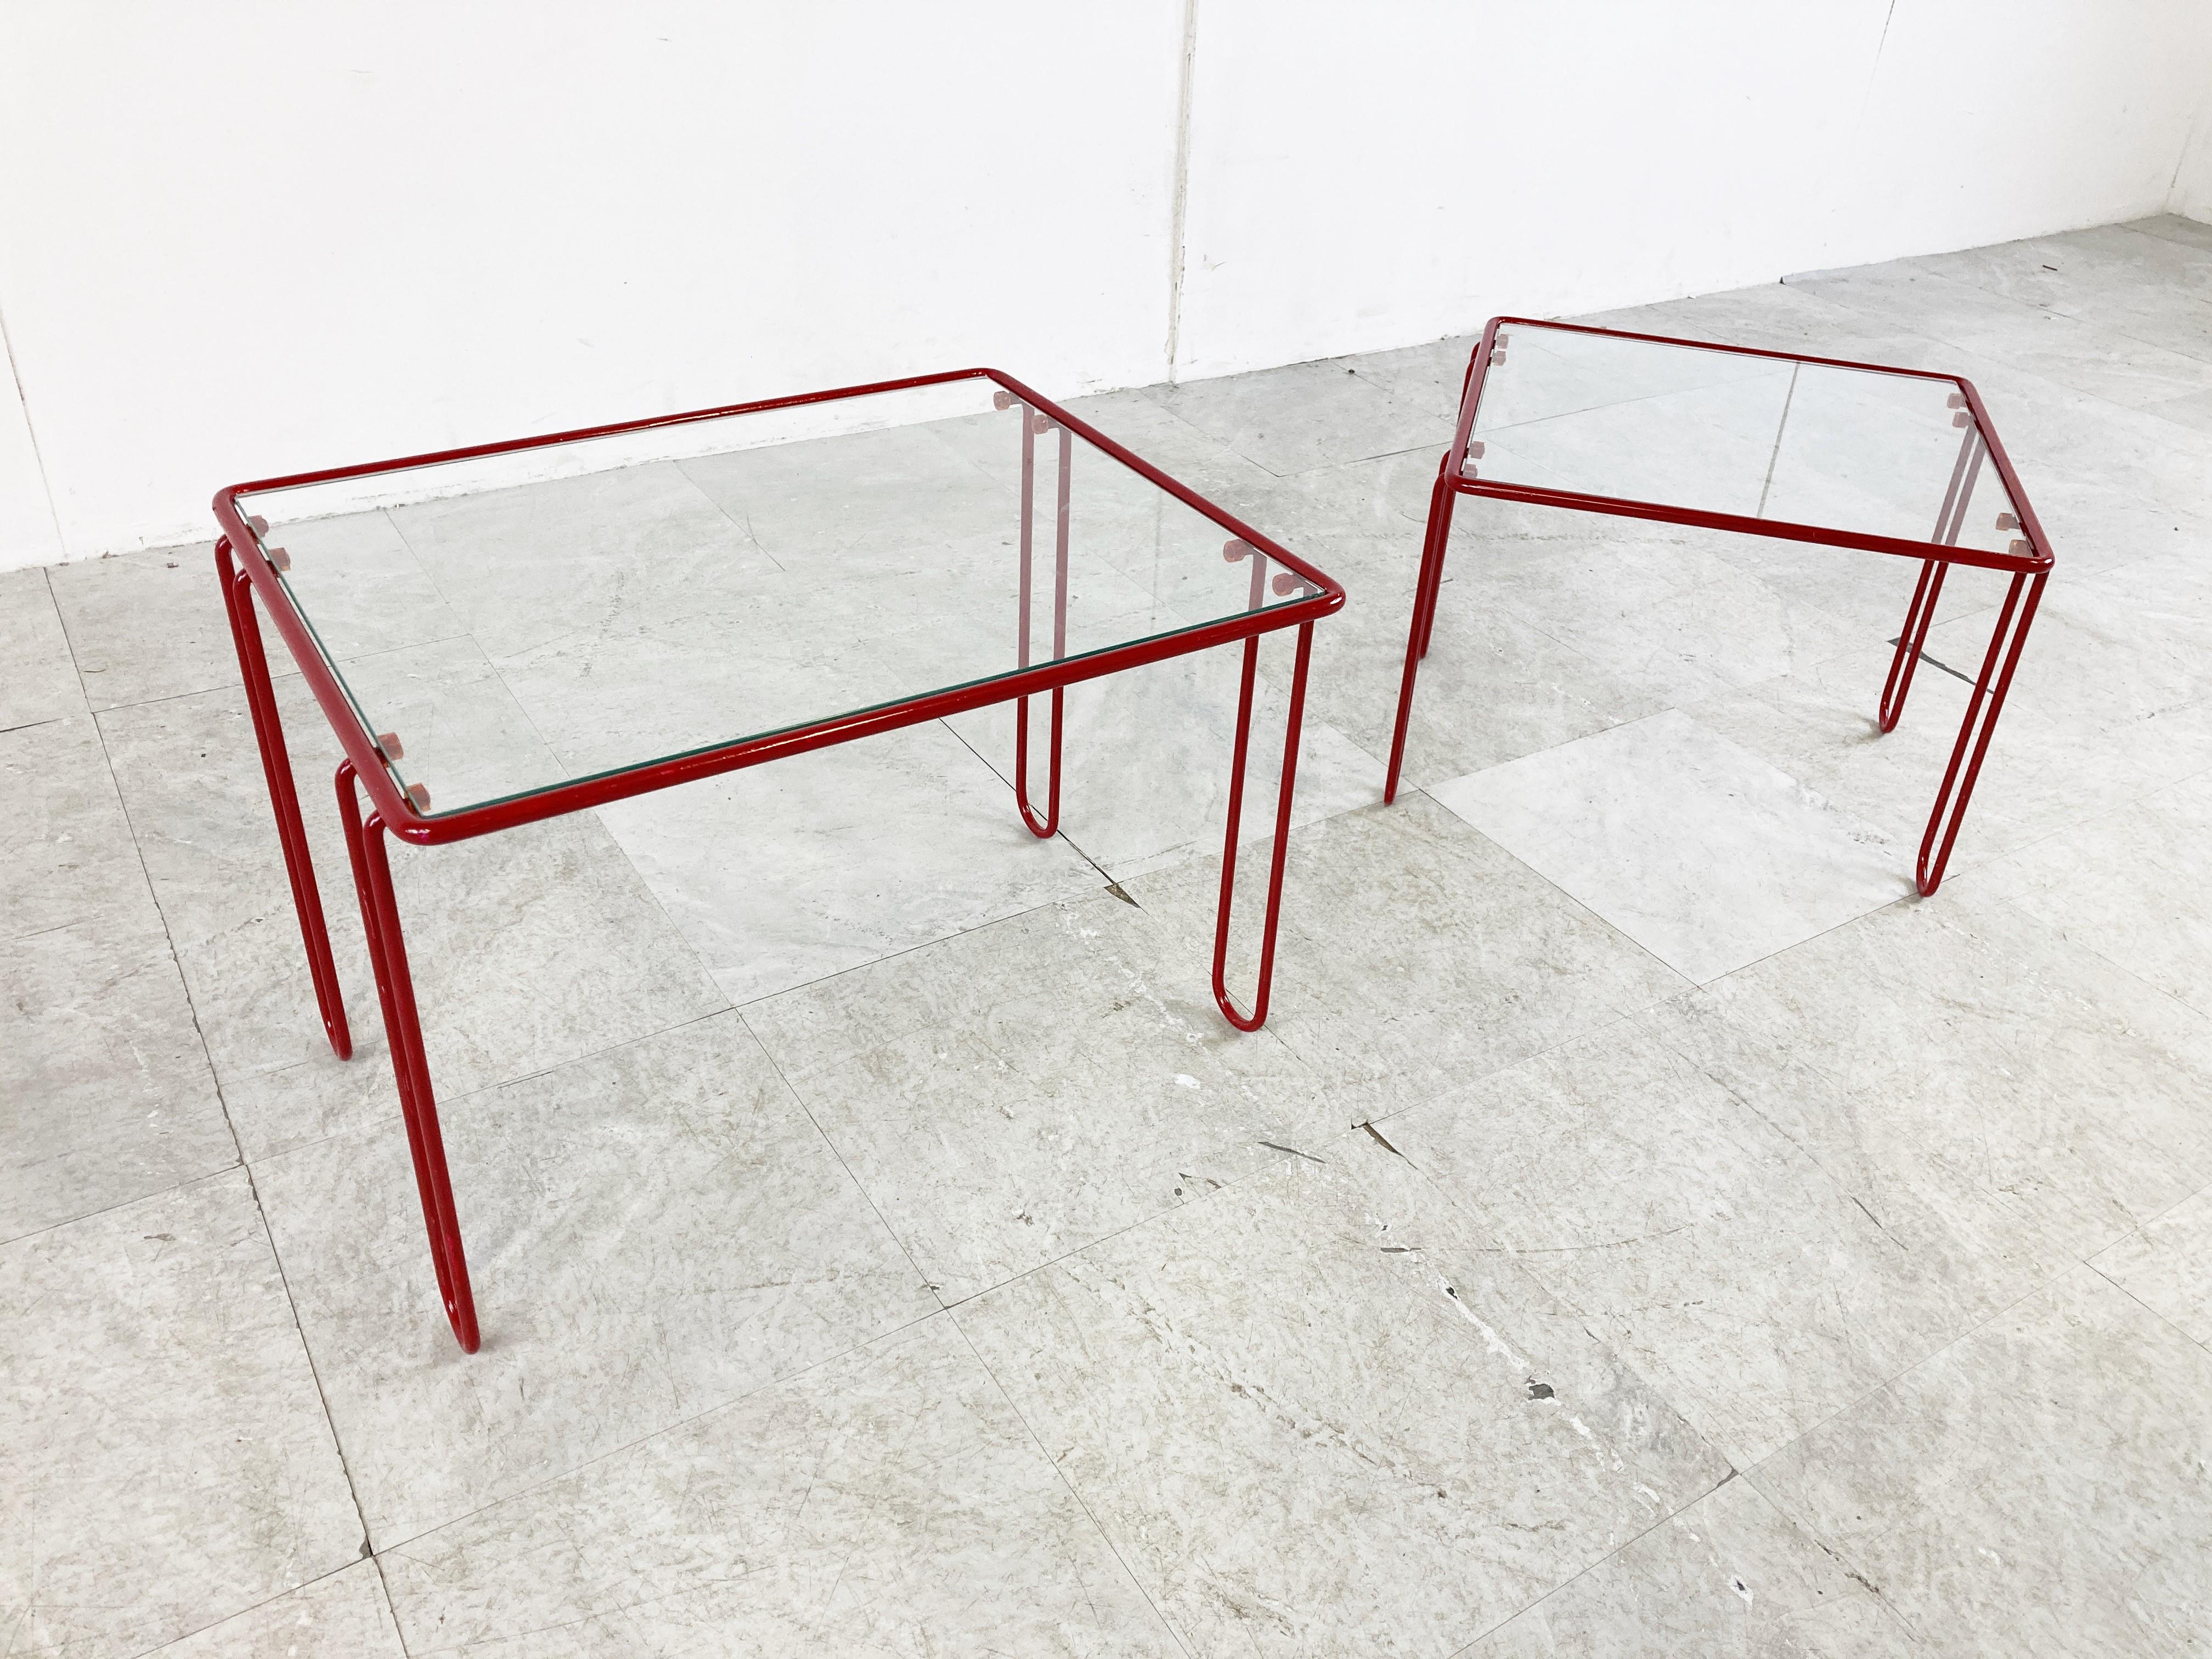 Pair of red lacquered metal post modern side tables or nesting tables.

They have a clear glass top.

Good condition

1980s - Belgium

Largest table:
Height: 36cm/14.17